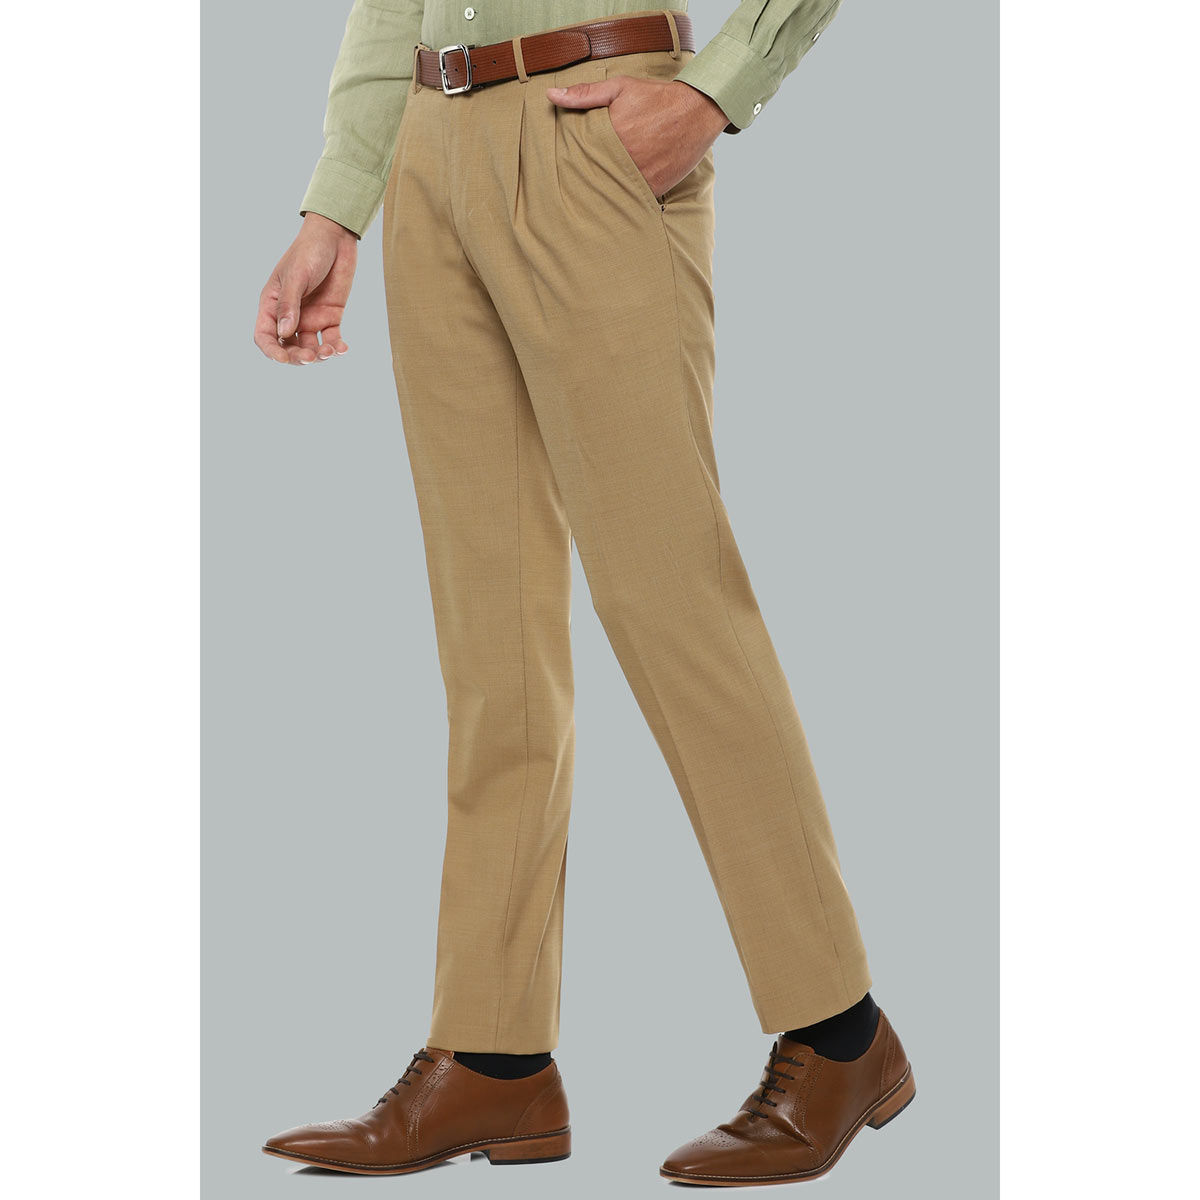 Louis Philippe Athwork Trousers  Buy Louis Philippe Athwork Trousers  online in India